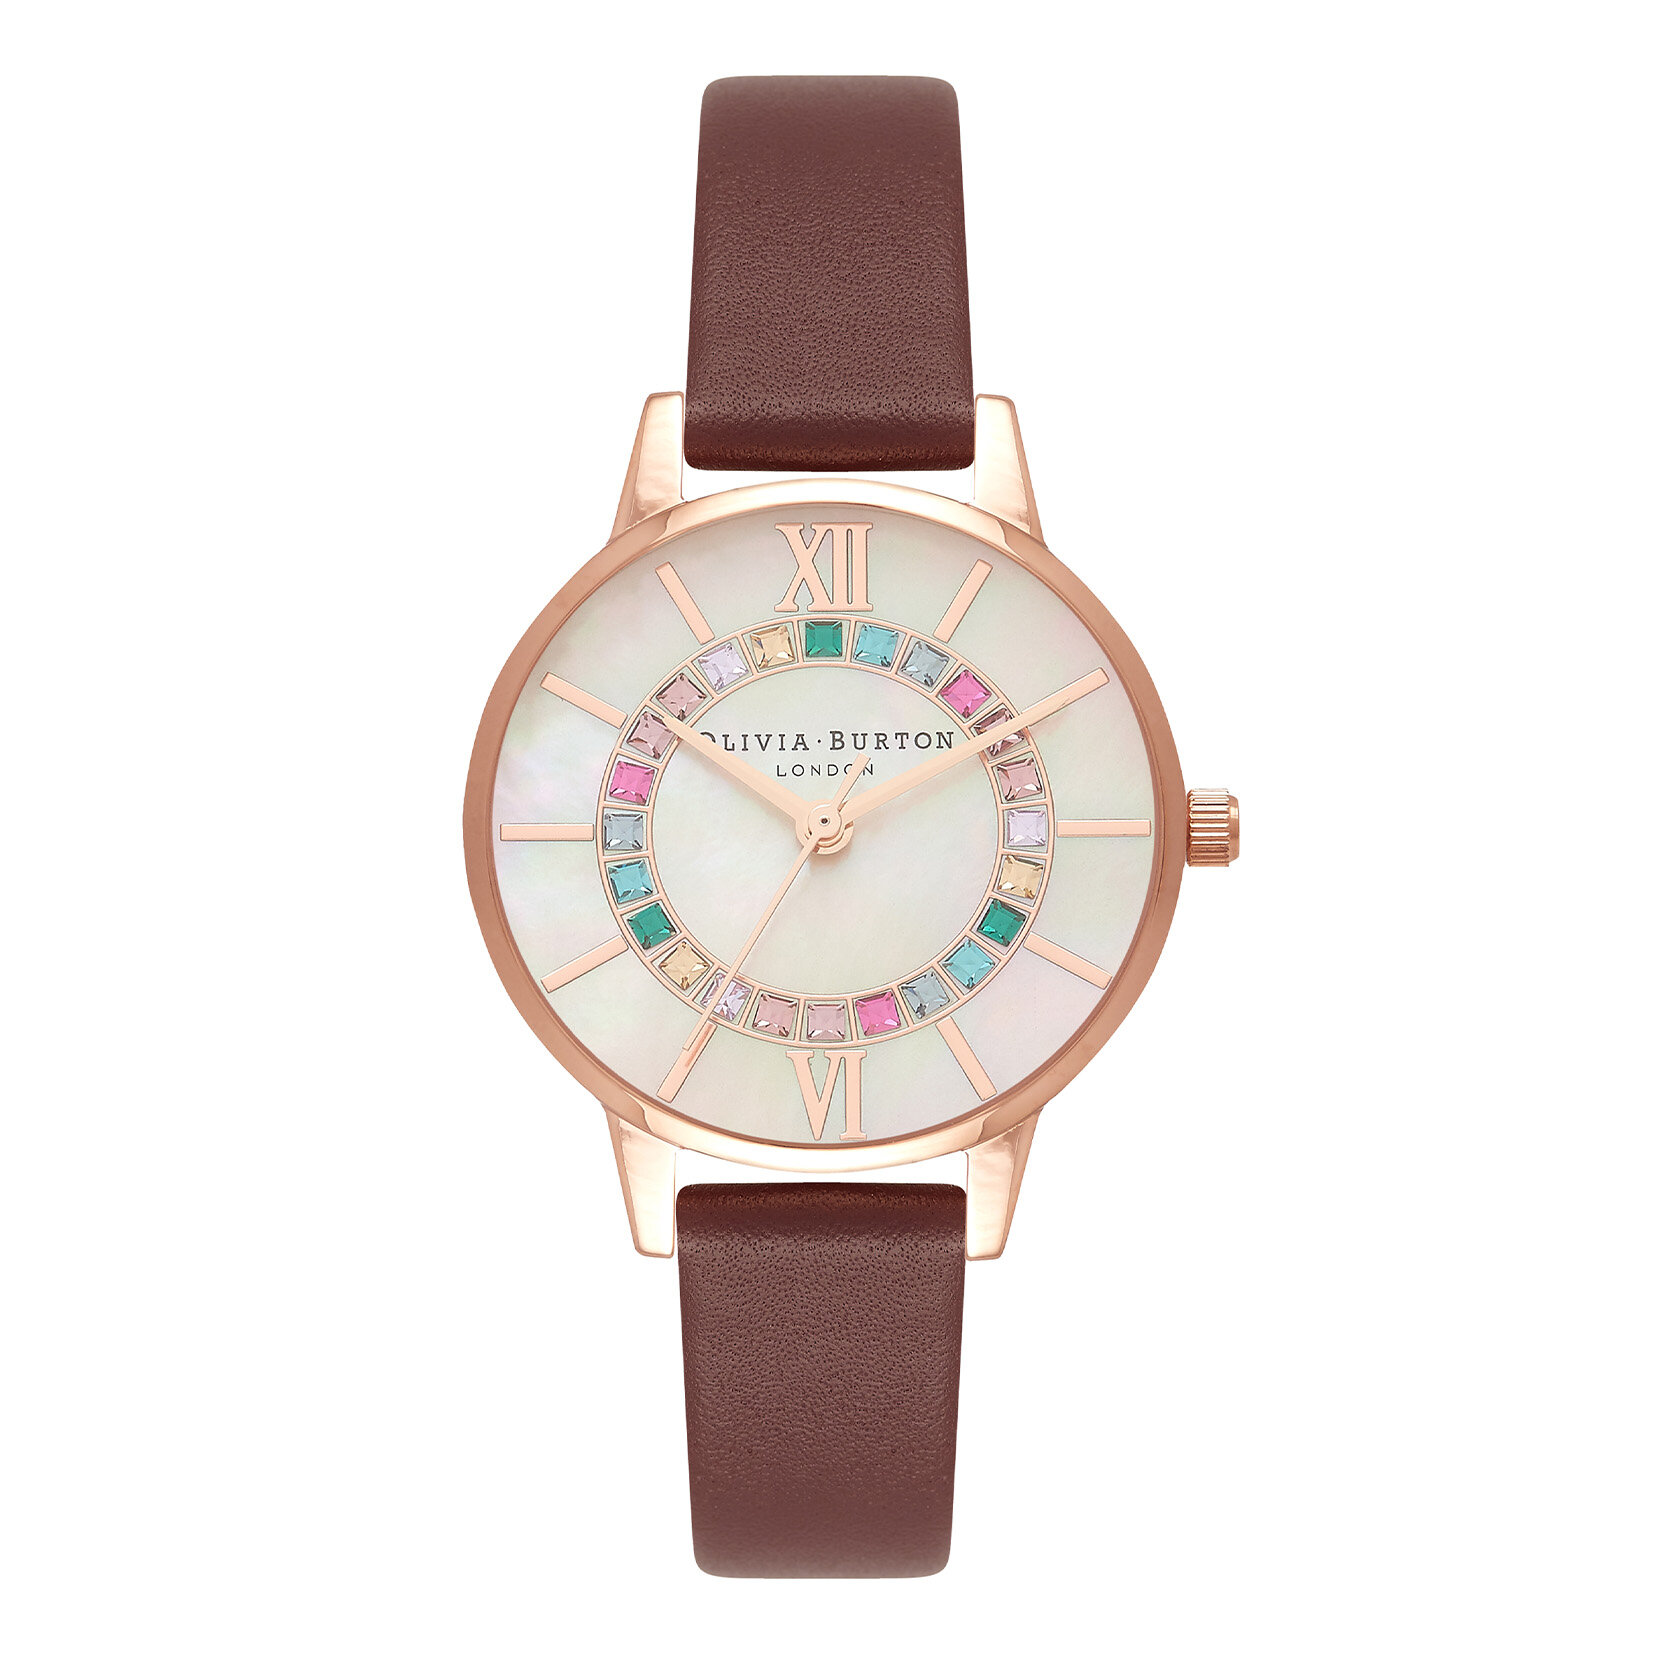 30mm Rose Gold & Burgundy Leather Strap Watch